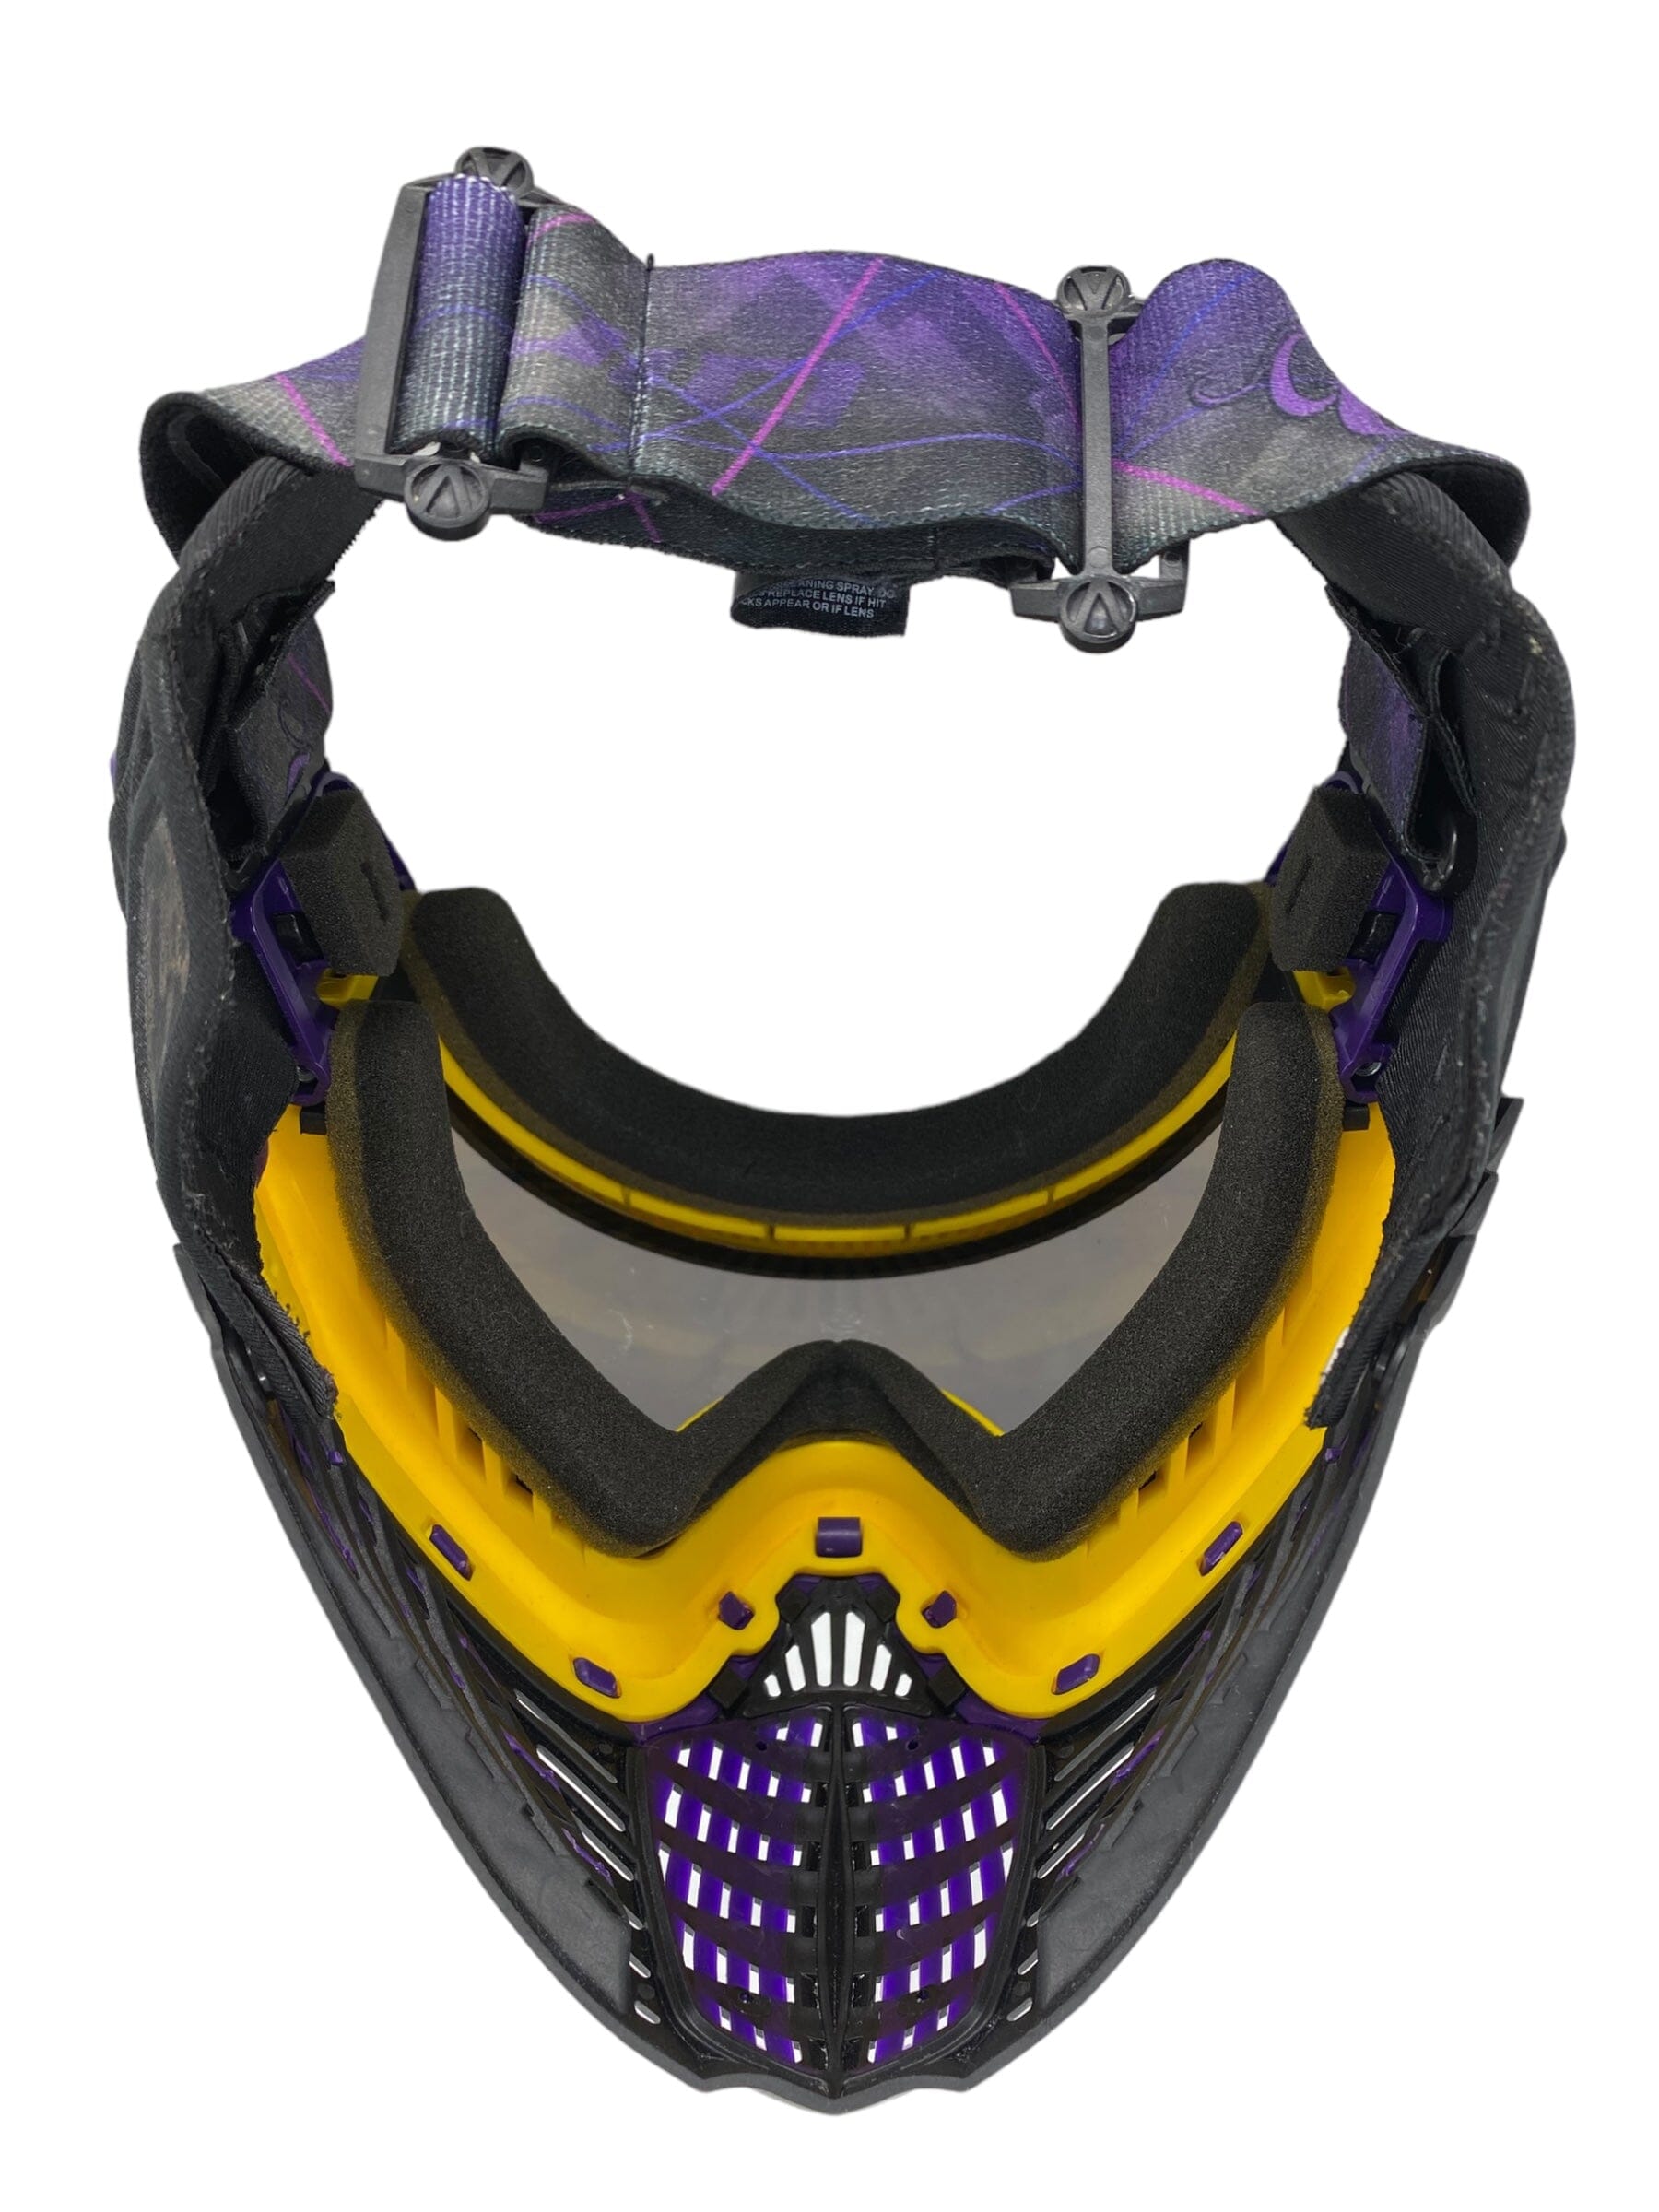 Used Virtue Vio Paintball Mask Goggle Paintball Gun from CPXBrosPaintball Buy/Sell/Trade Paintball Markers, New Paintball Guns, Paintball Hoppers, Paintball Masks, and Hormesis Headbands